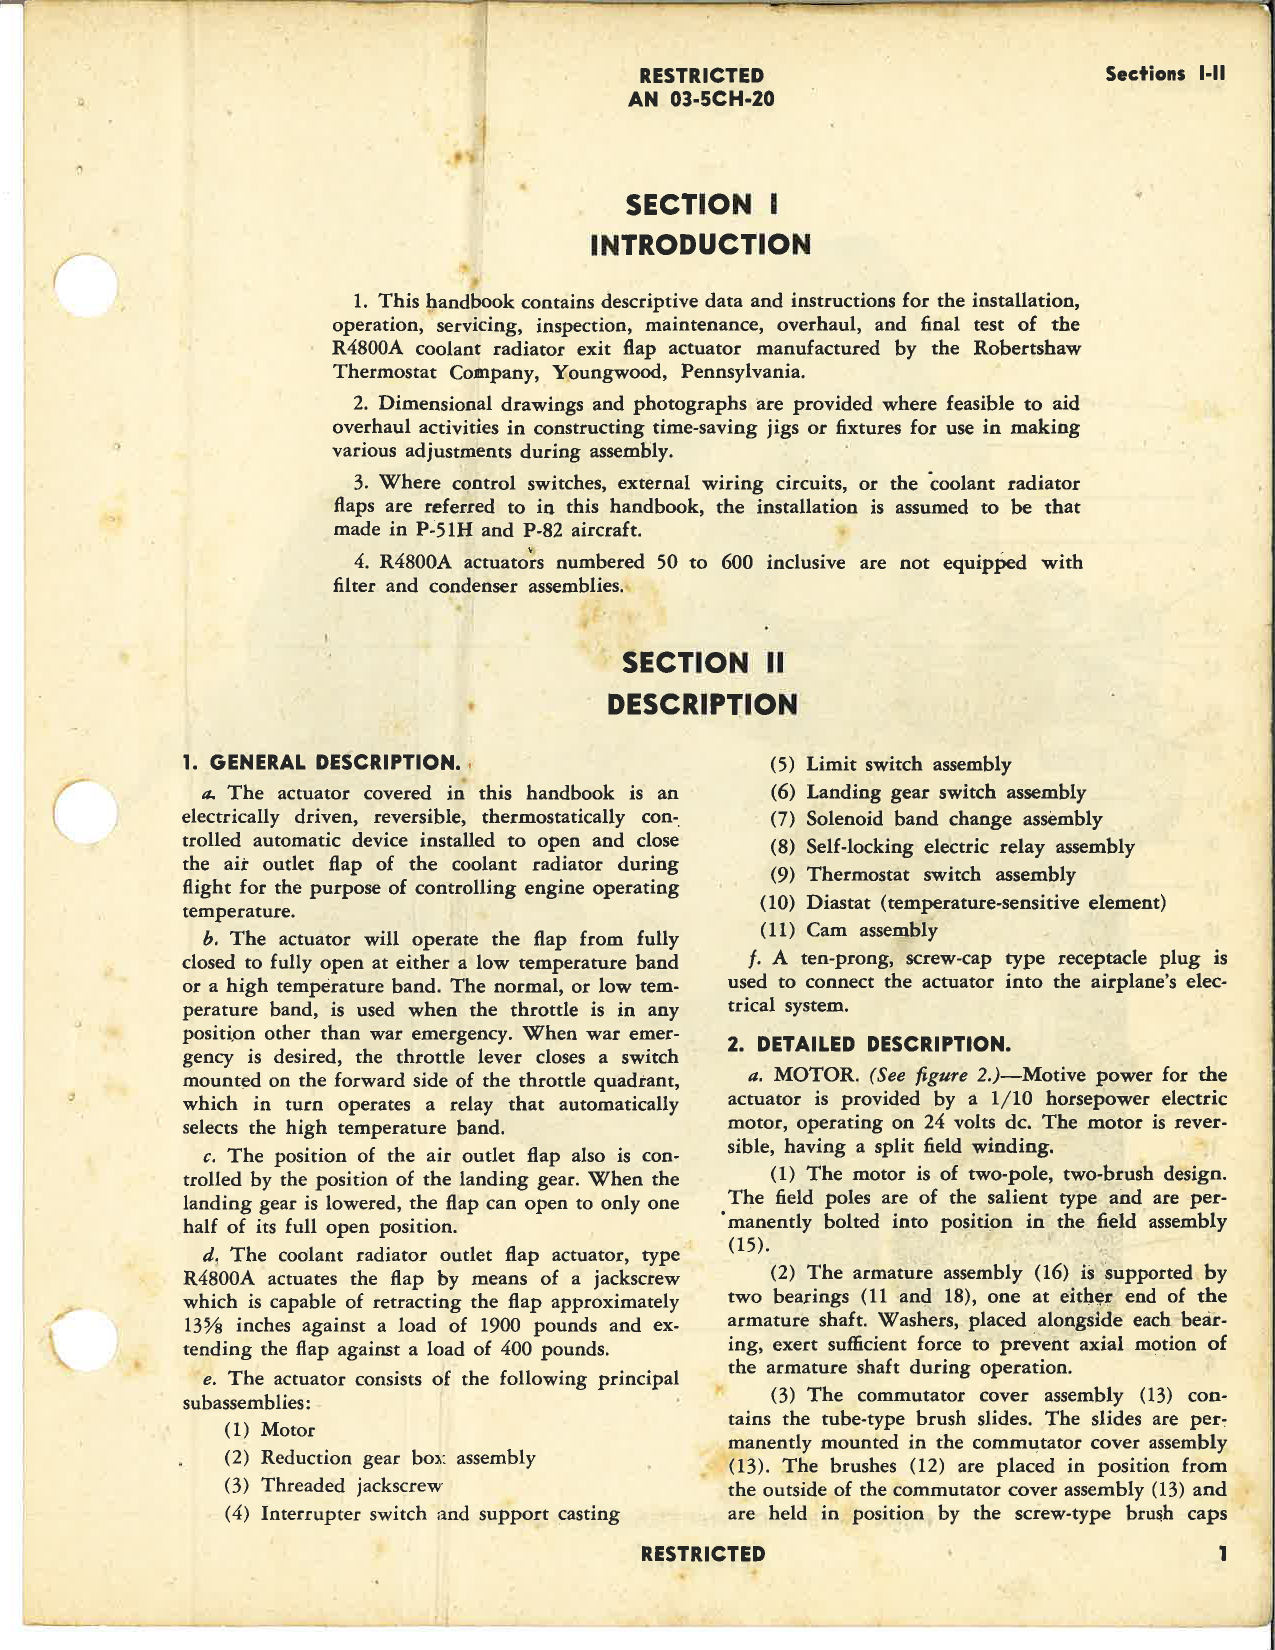 Sample page 5 from AirCorps Library document: Operation, Service & Overhaul Instructions with Parts Catalog for Coolant Radiator Exit Flap Actuator Type R4800A